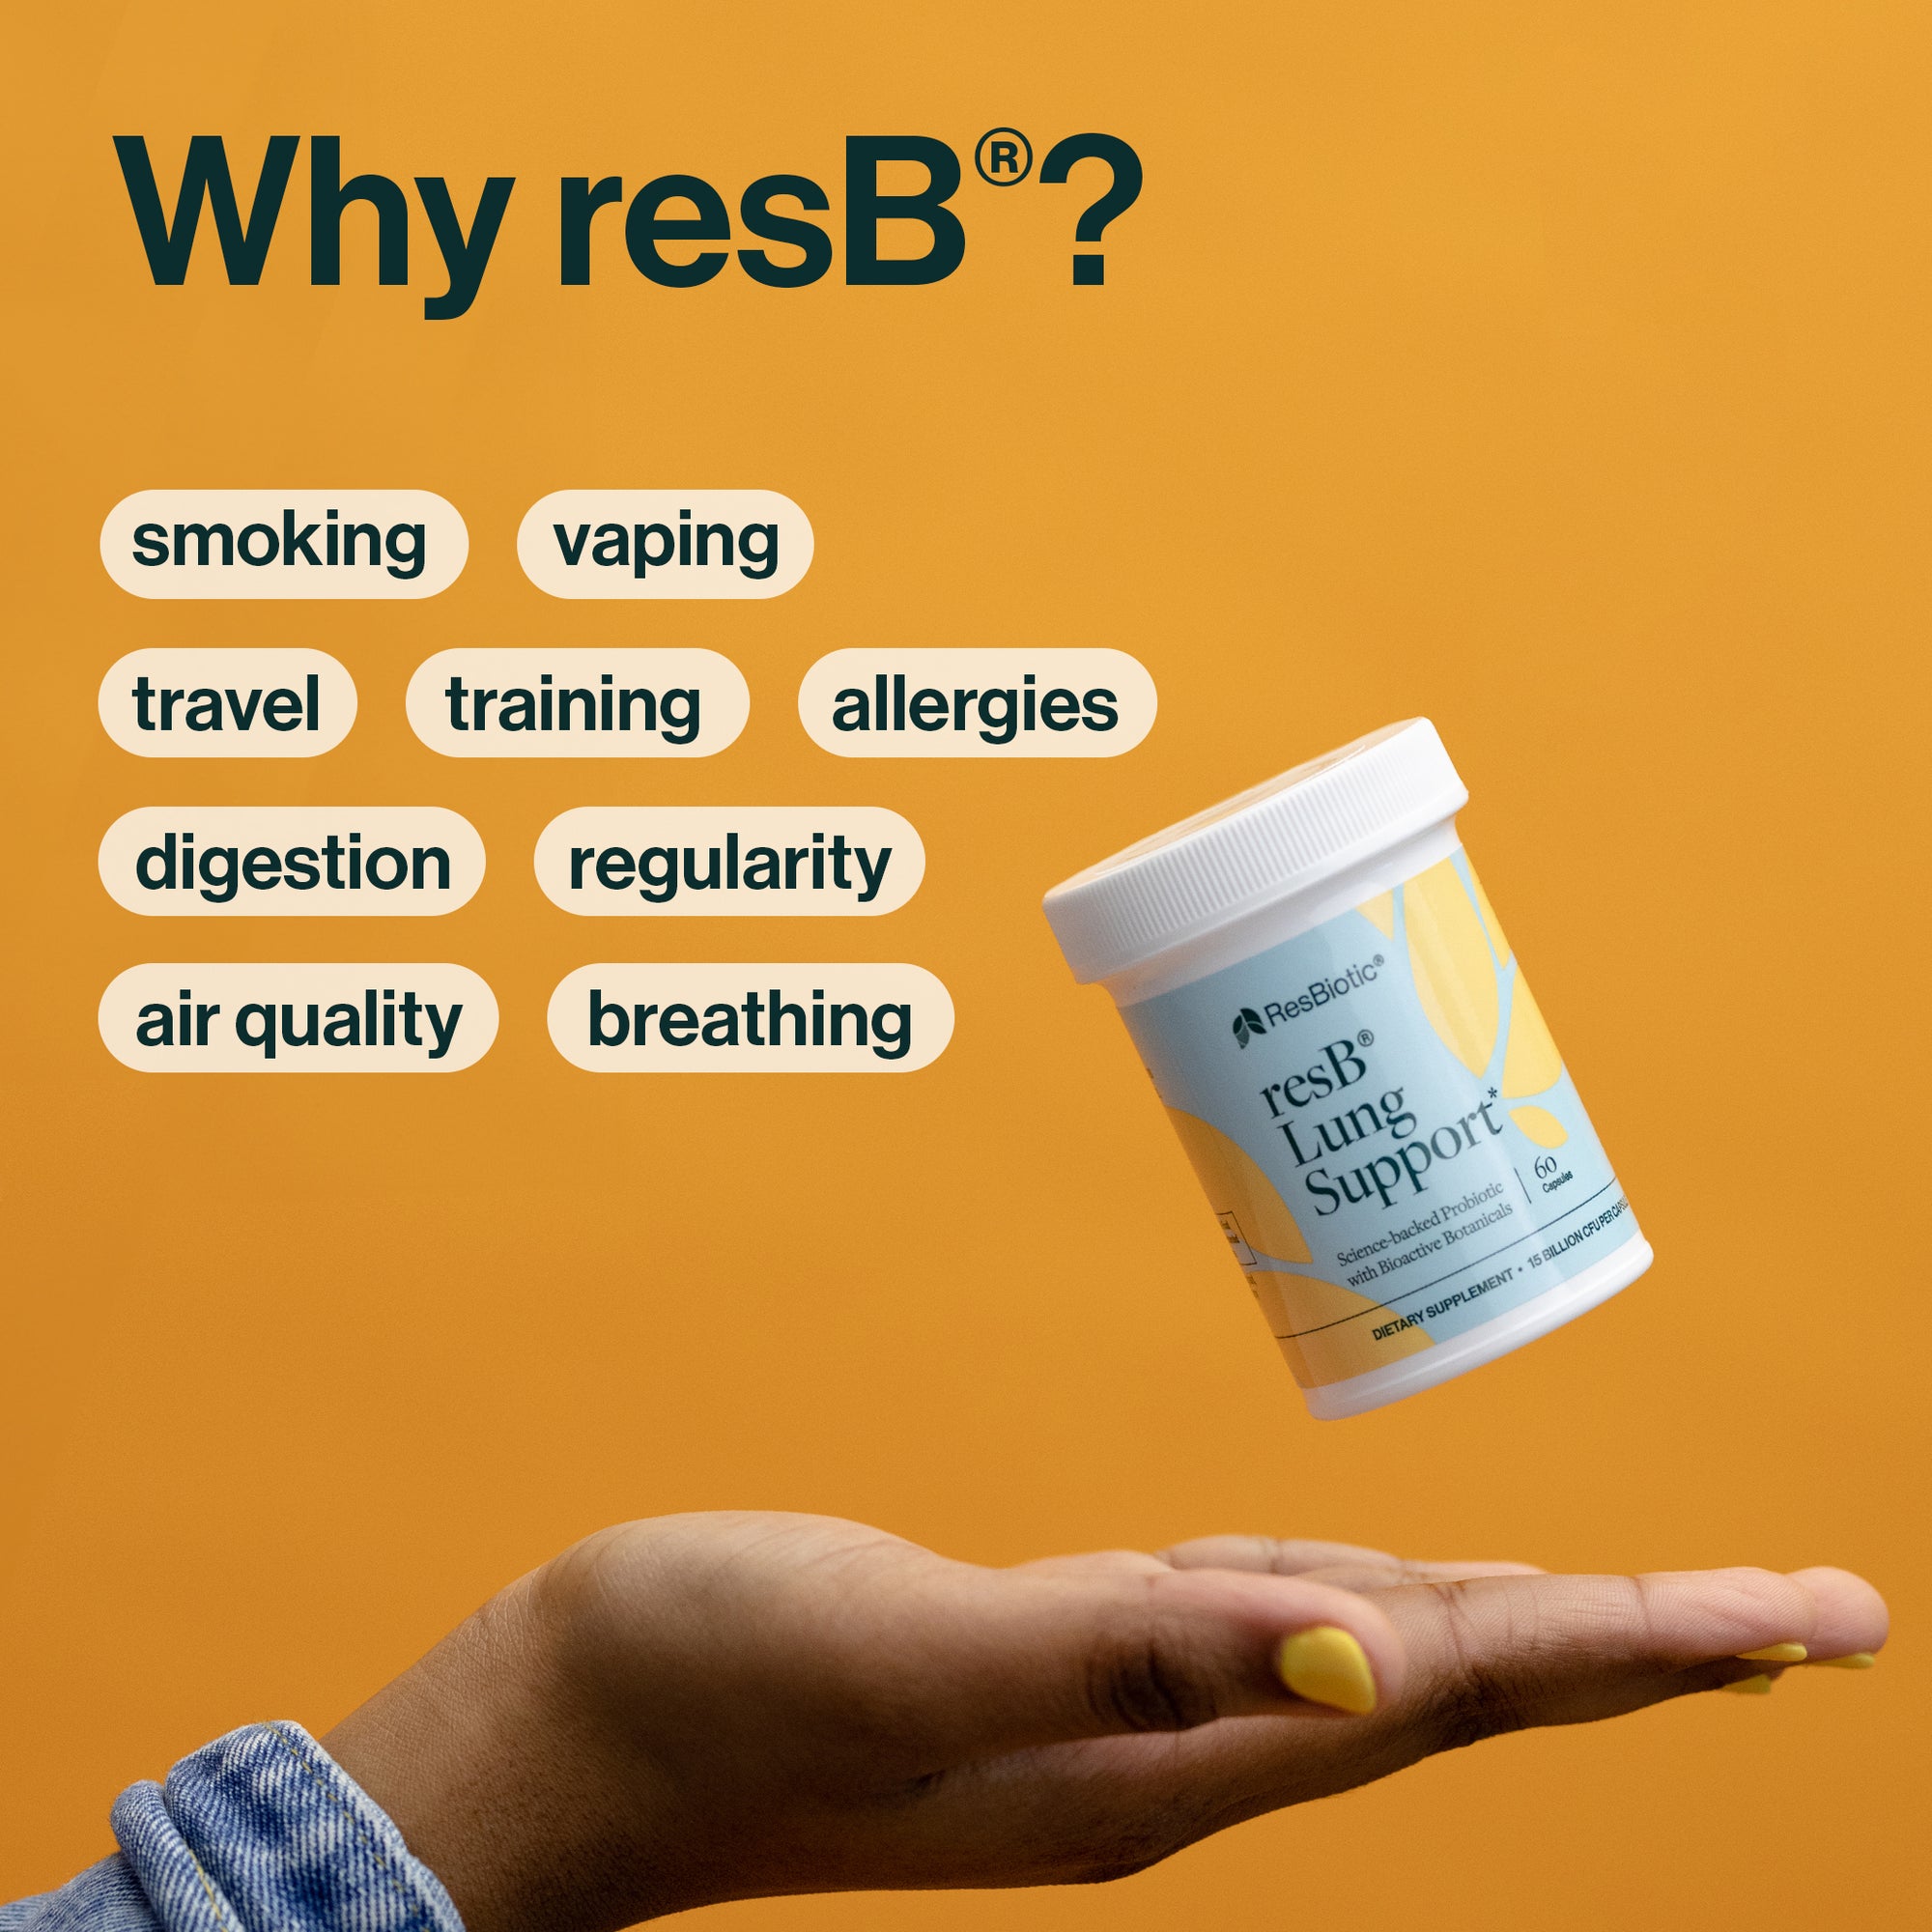 resB® Gut Lung Support Probiotic